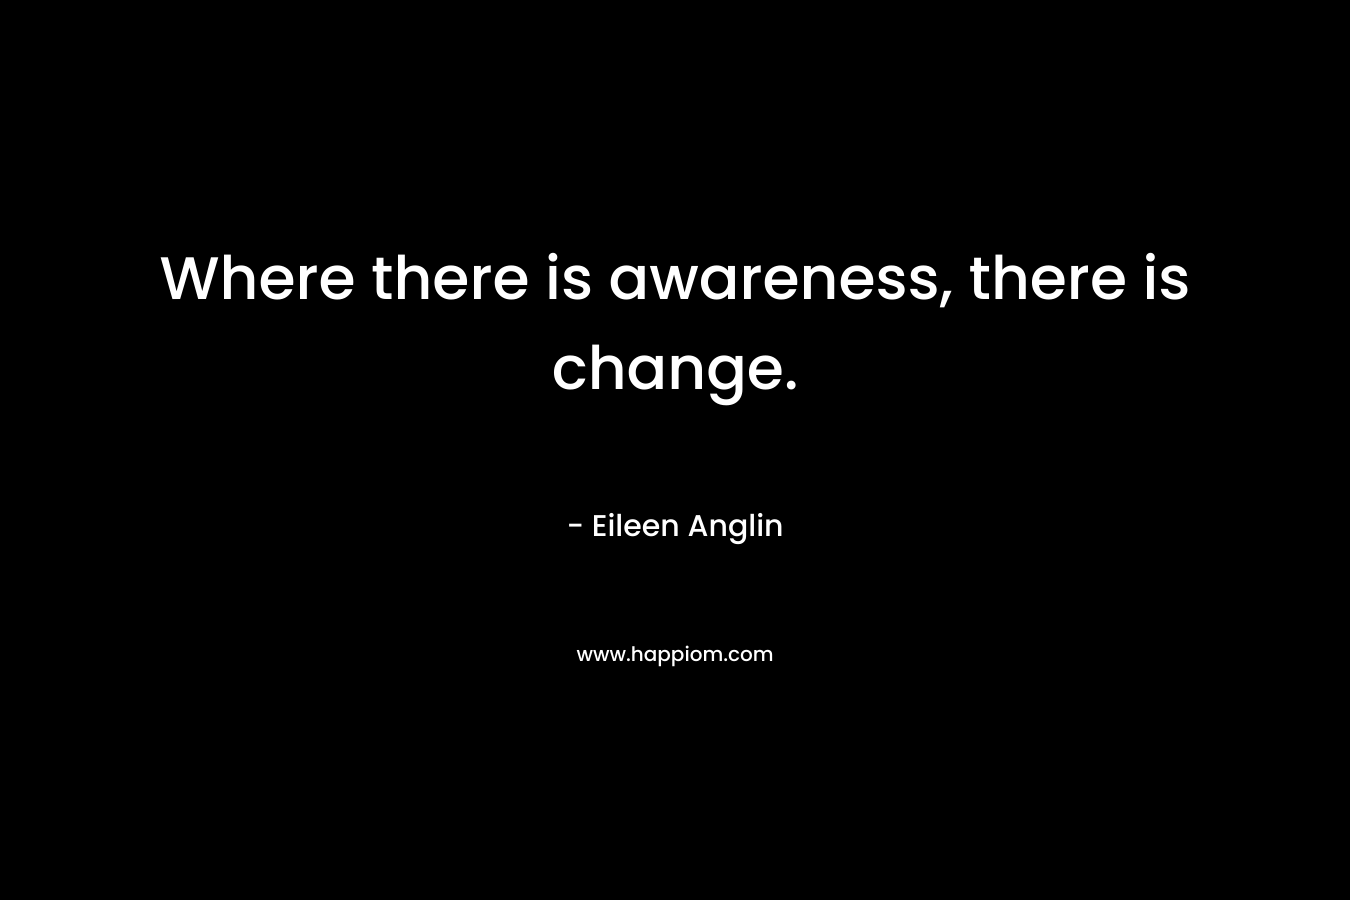 Where there is awareness, there is change. – Eileen Anglin